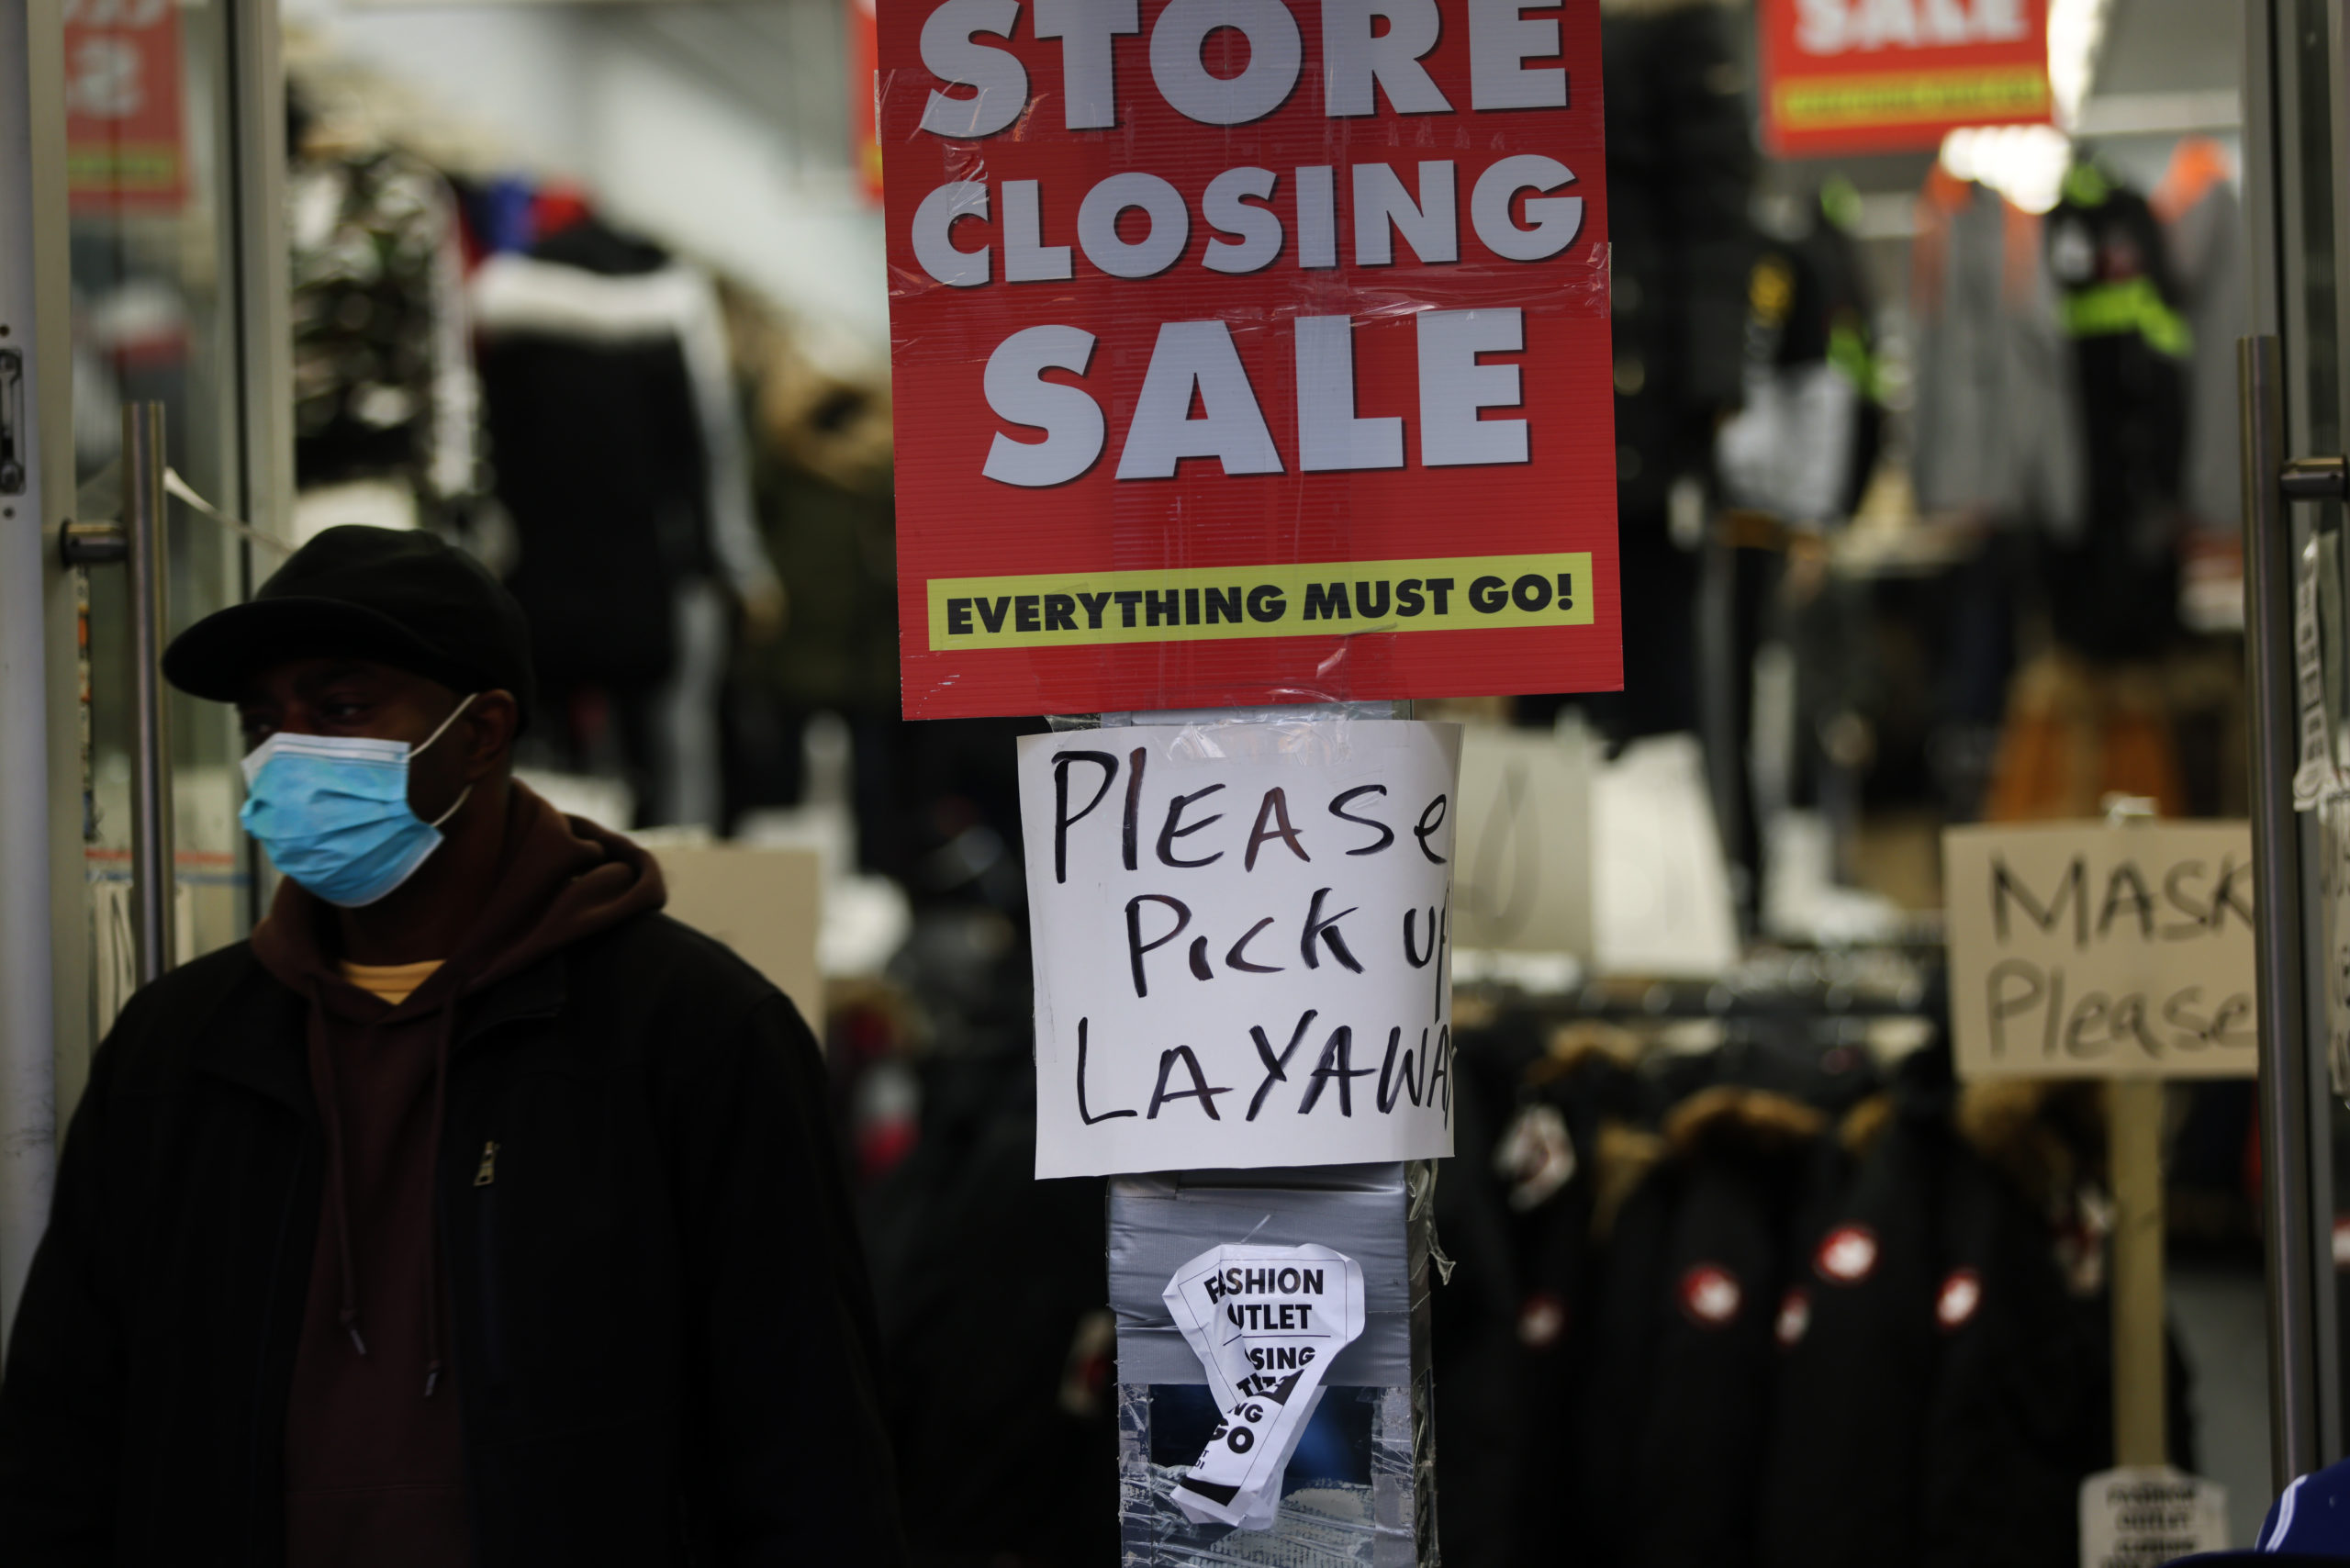 Sale signs are displayed in the window of a Brooklyn, New York on Dec. 1. (Spencer Platt/Getty Images)